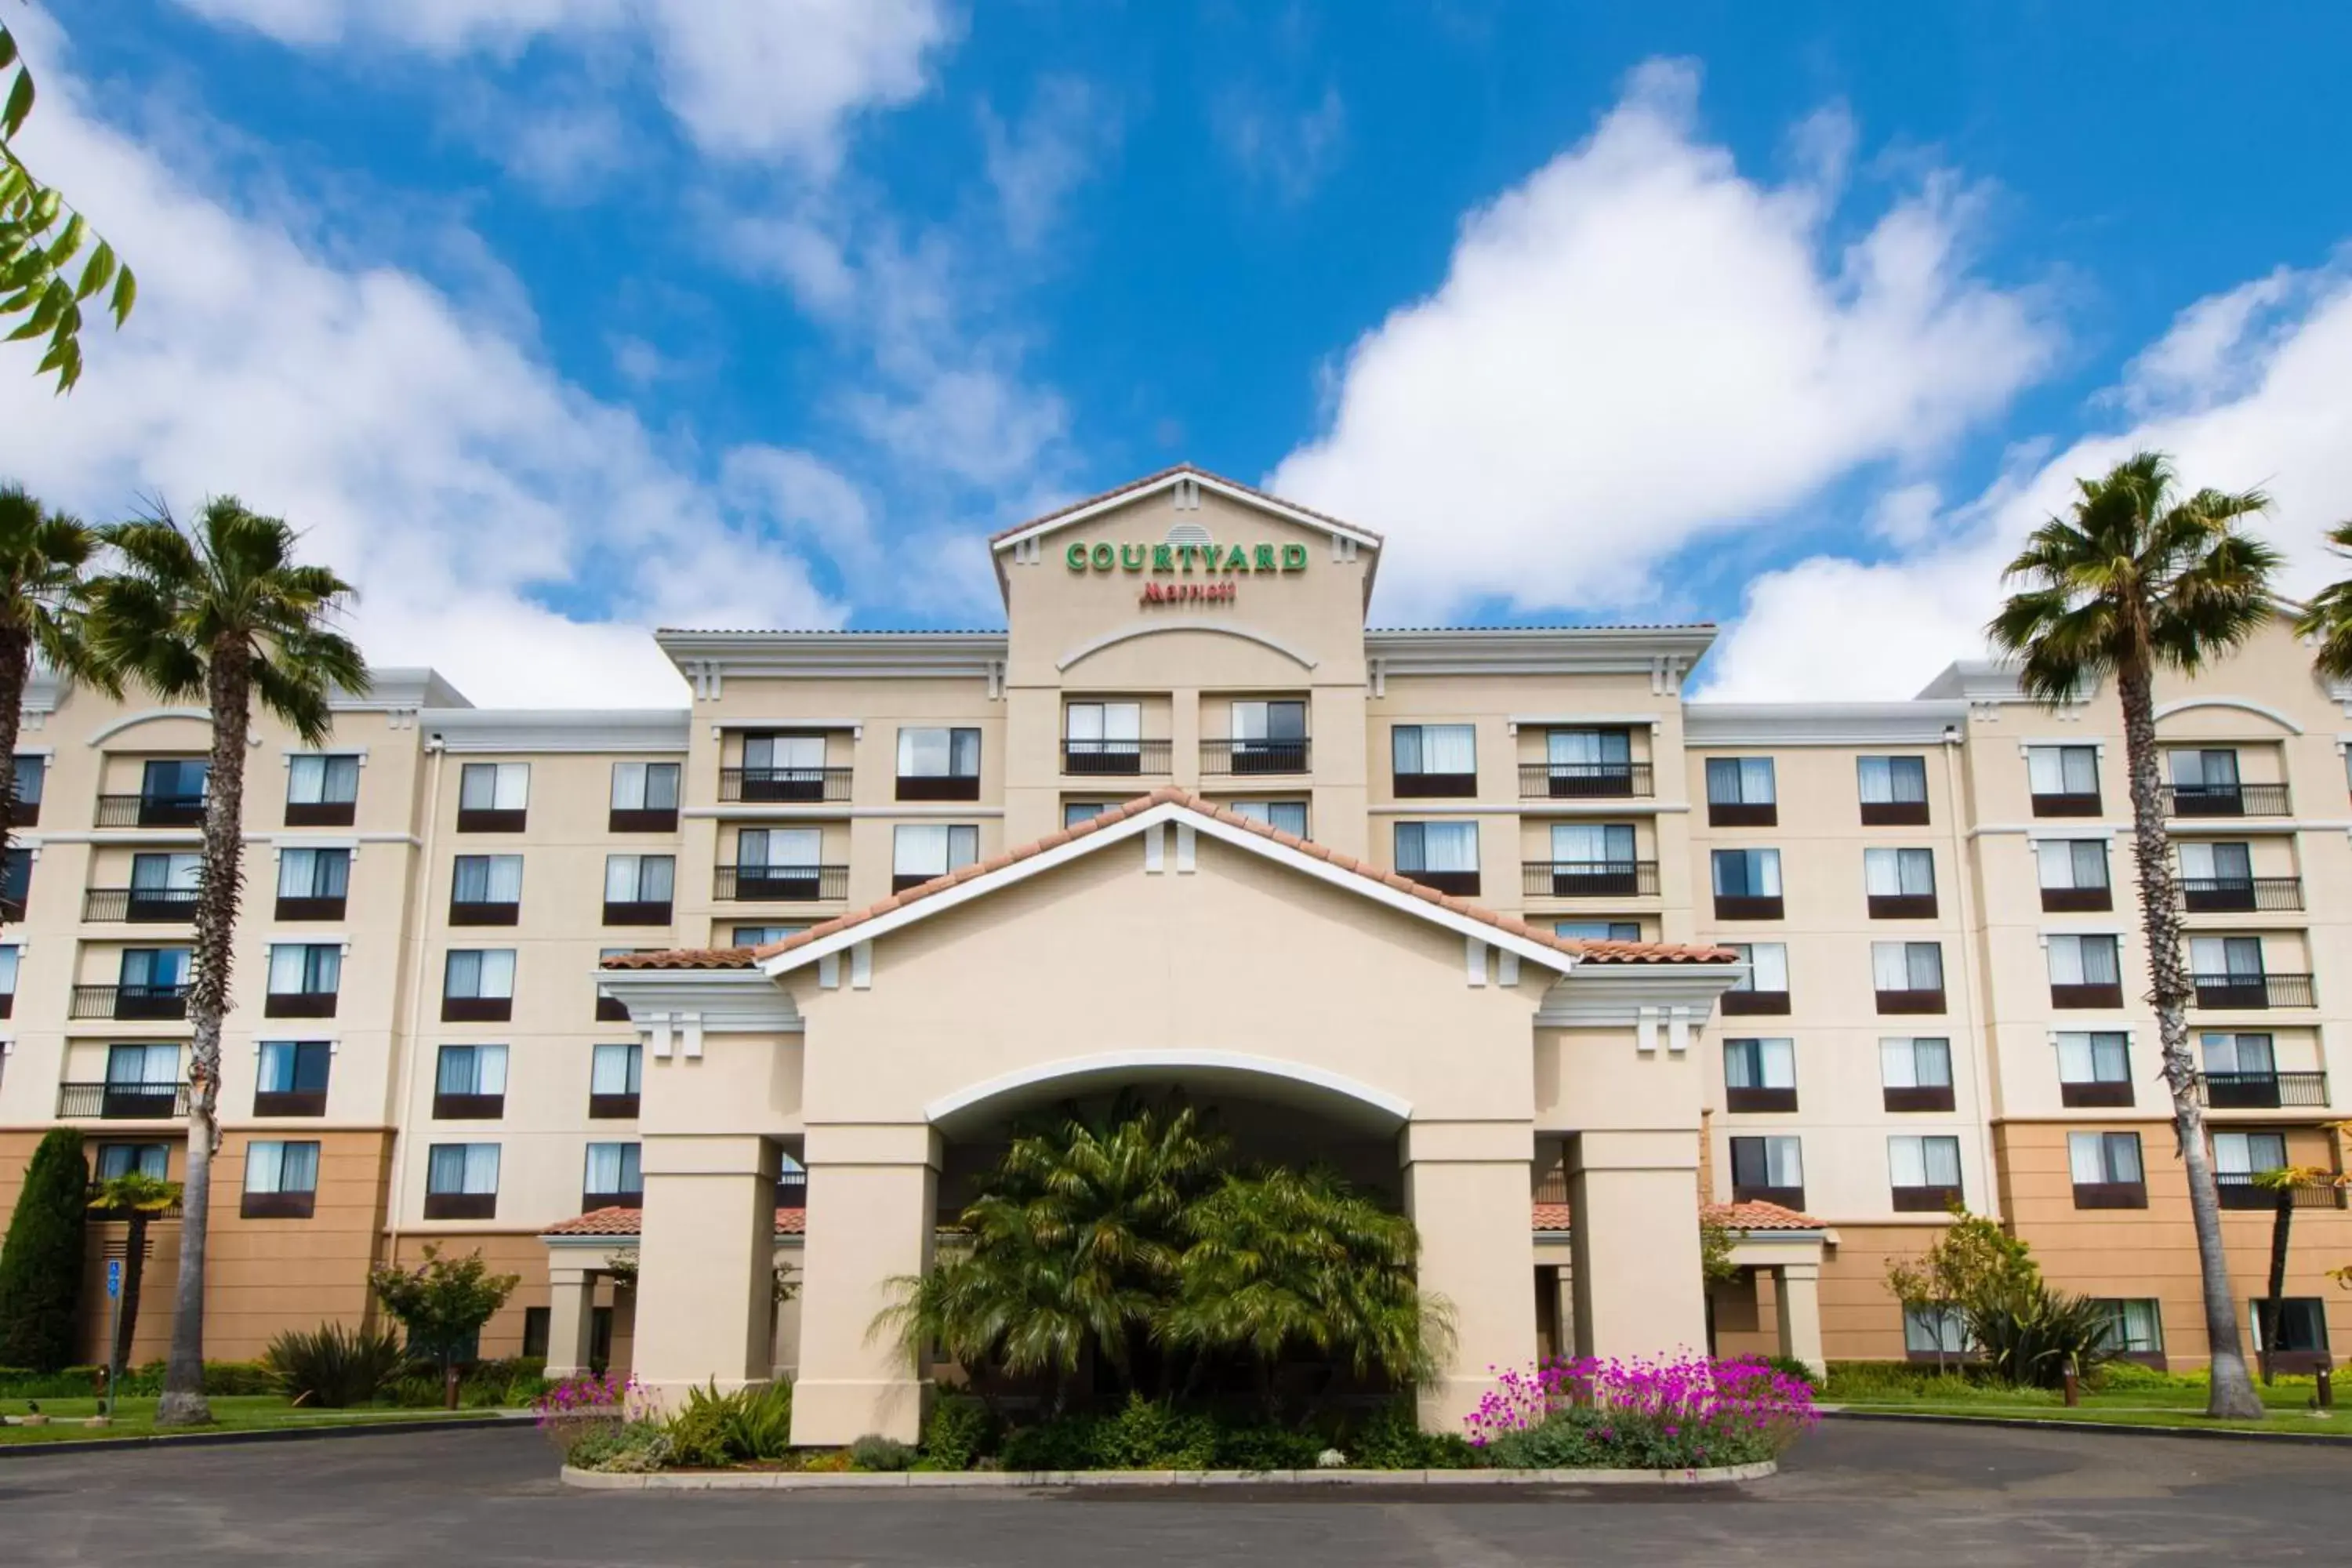 Property Building in Courtyard by Marriott Newark Silicon Valley